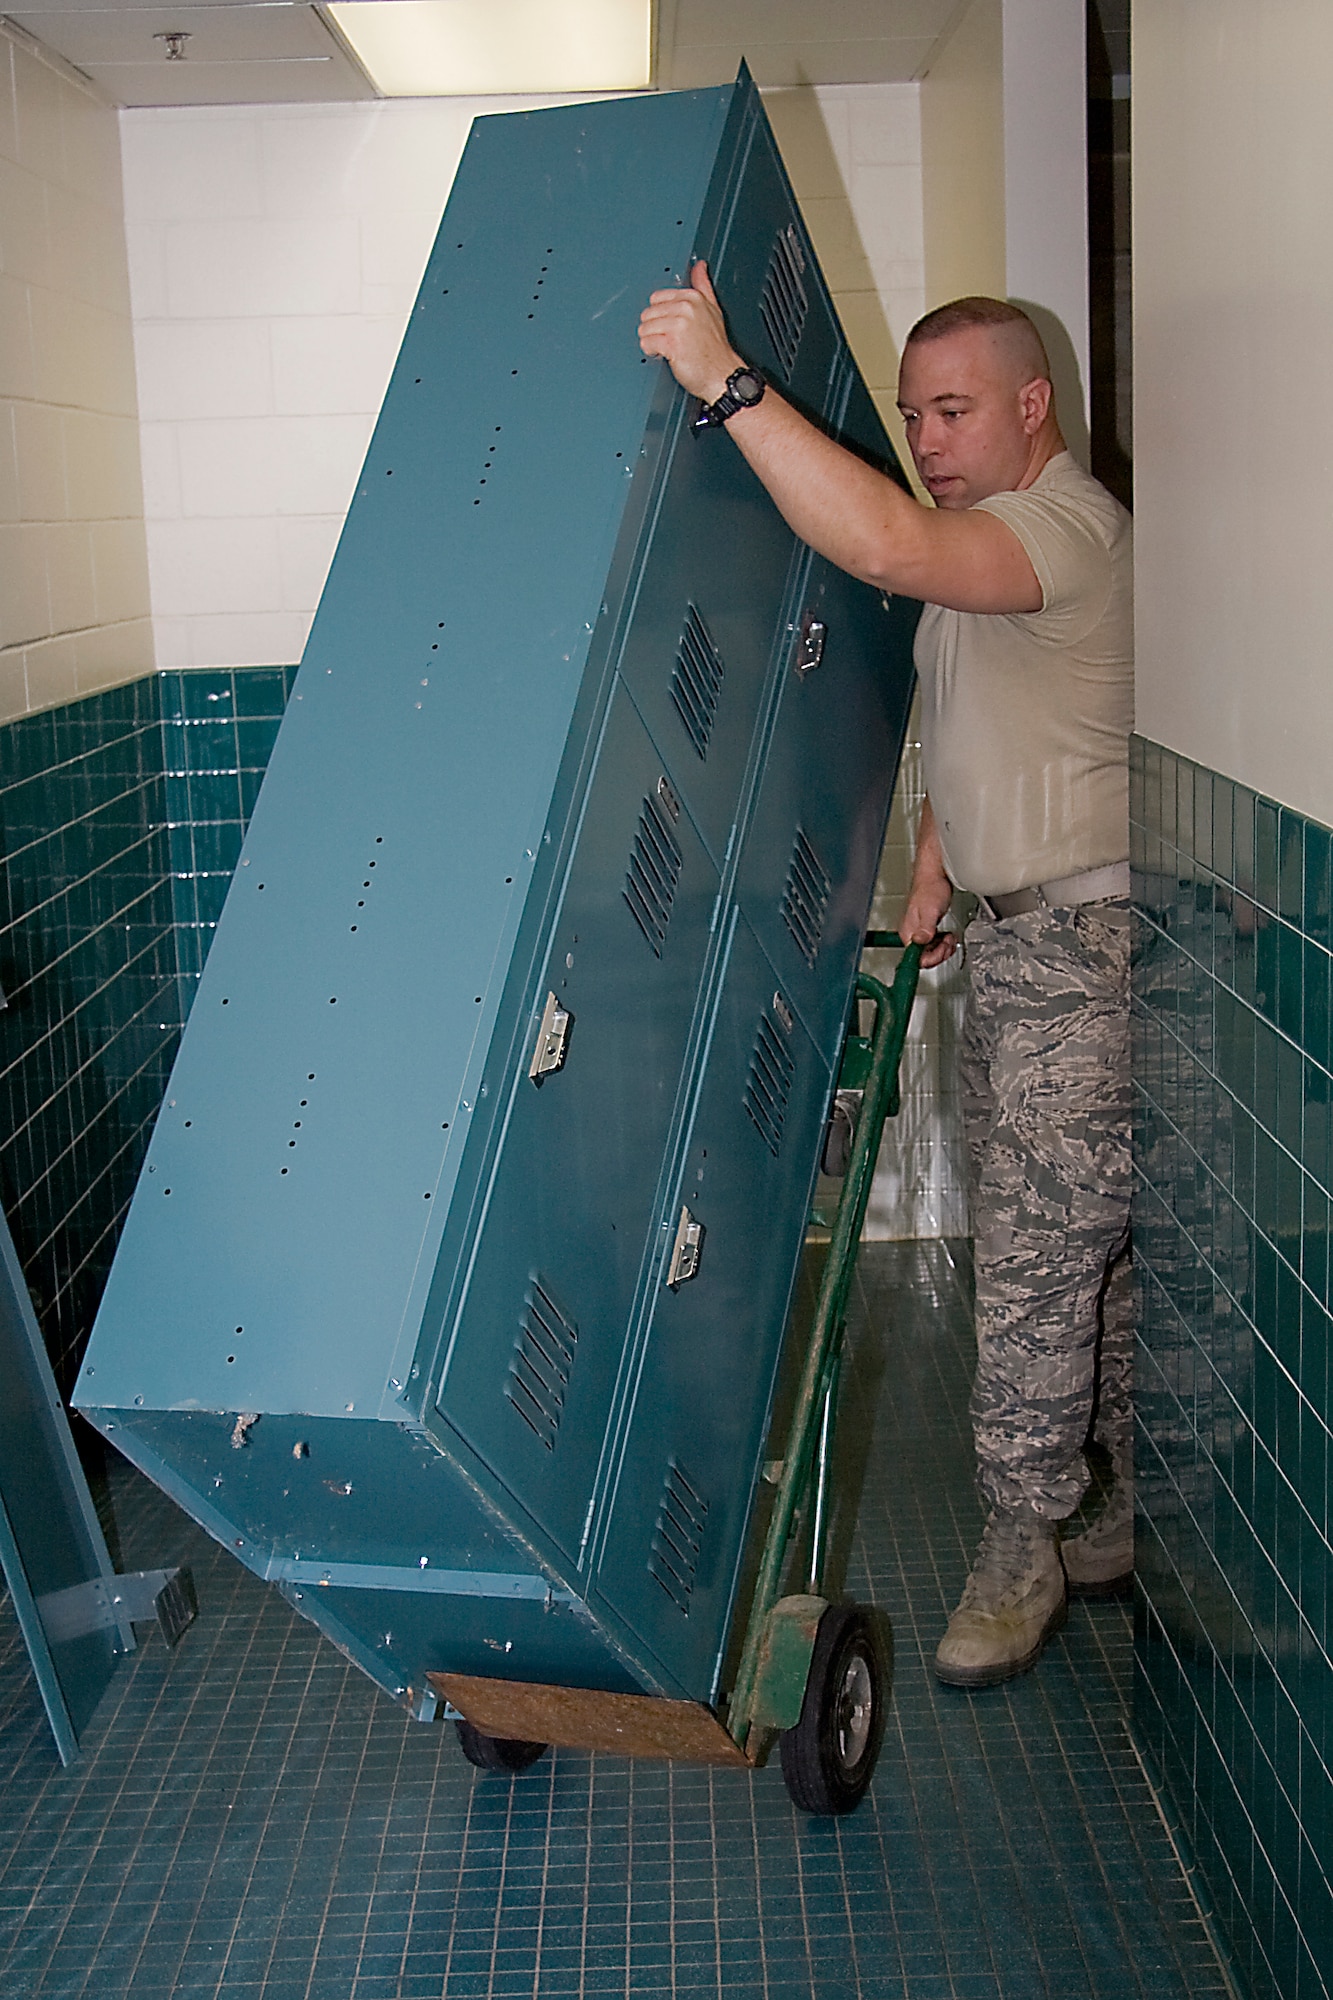 GRISSOM AIR RESERVE BASE, Ind. -- Airman 1st Class David Kessen, 434th Civil Engineer Squadron engineer apprentice, removes old lockers from the base fitness center here Feb. 14. New wooden lockers were recently installed, which provide double the storage space to the user and replaced metal lockers that were originally installed when the facility was a child development center. (U.S. Air Force photo/Tech. Sgt. Mark R. W. Orders-Woempner) 
